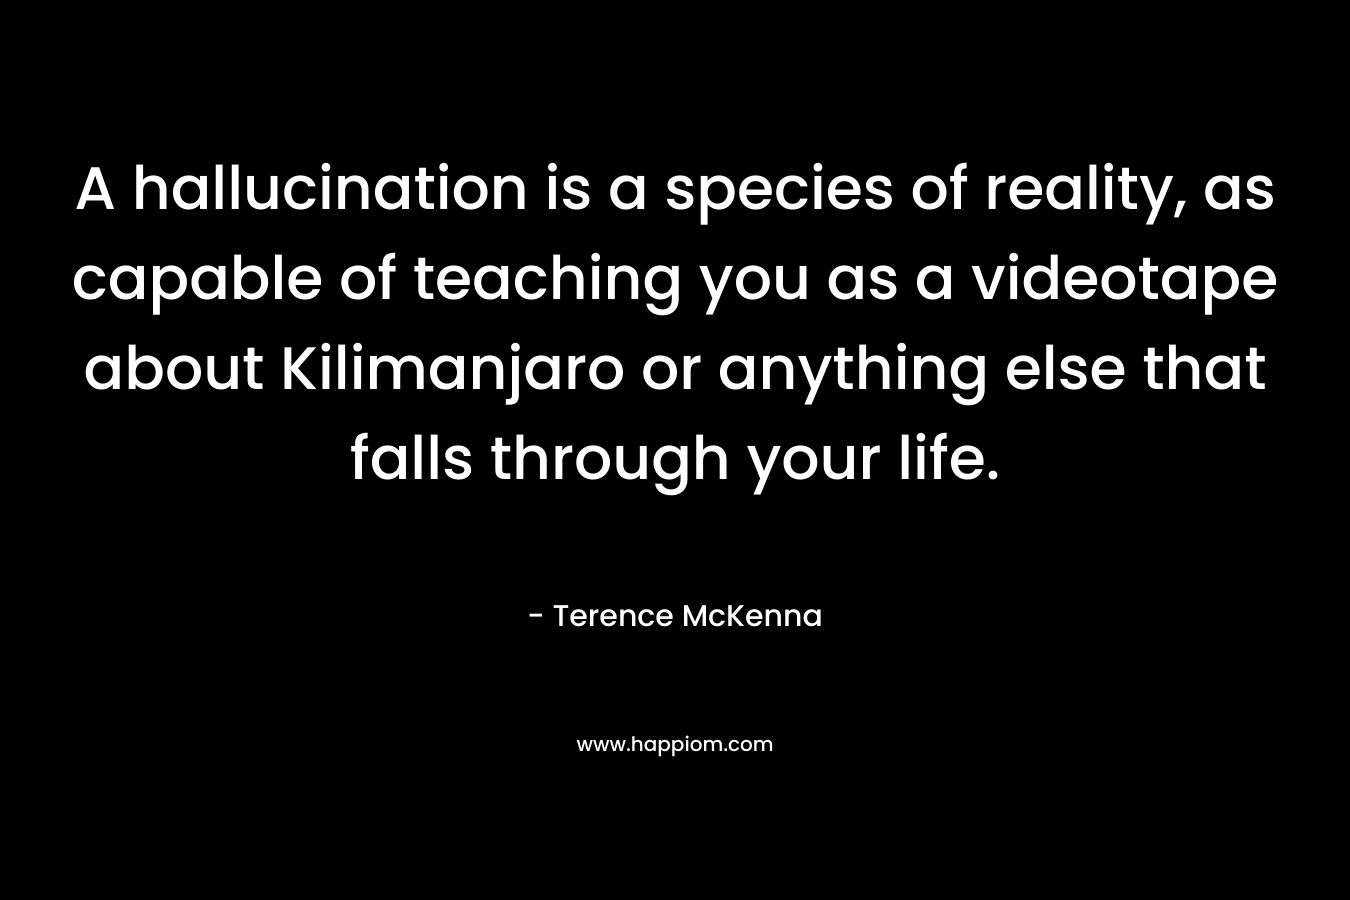 A hallucination is a species of reality, as capable of teaching you as a videotape about Kilimanjaro or anything else that falls through your life.